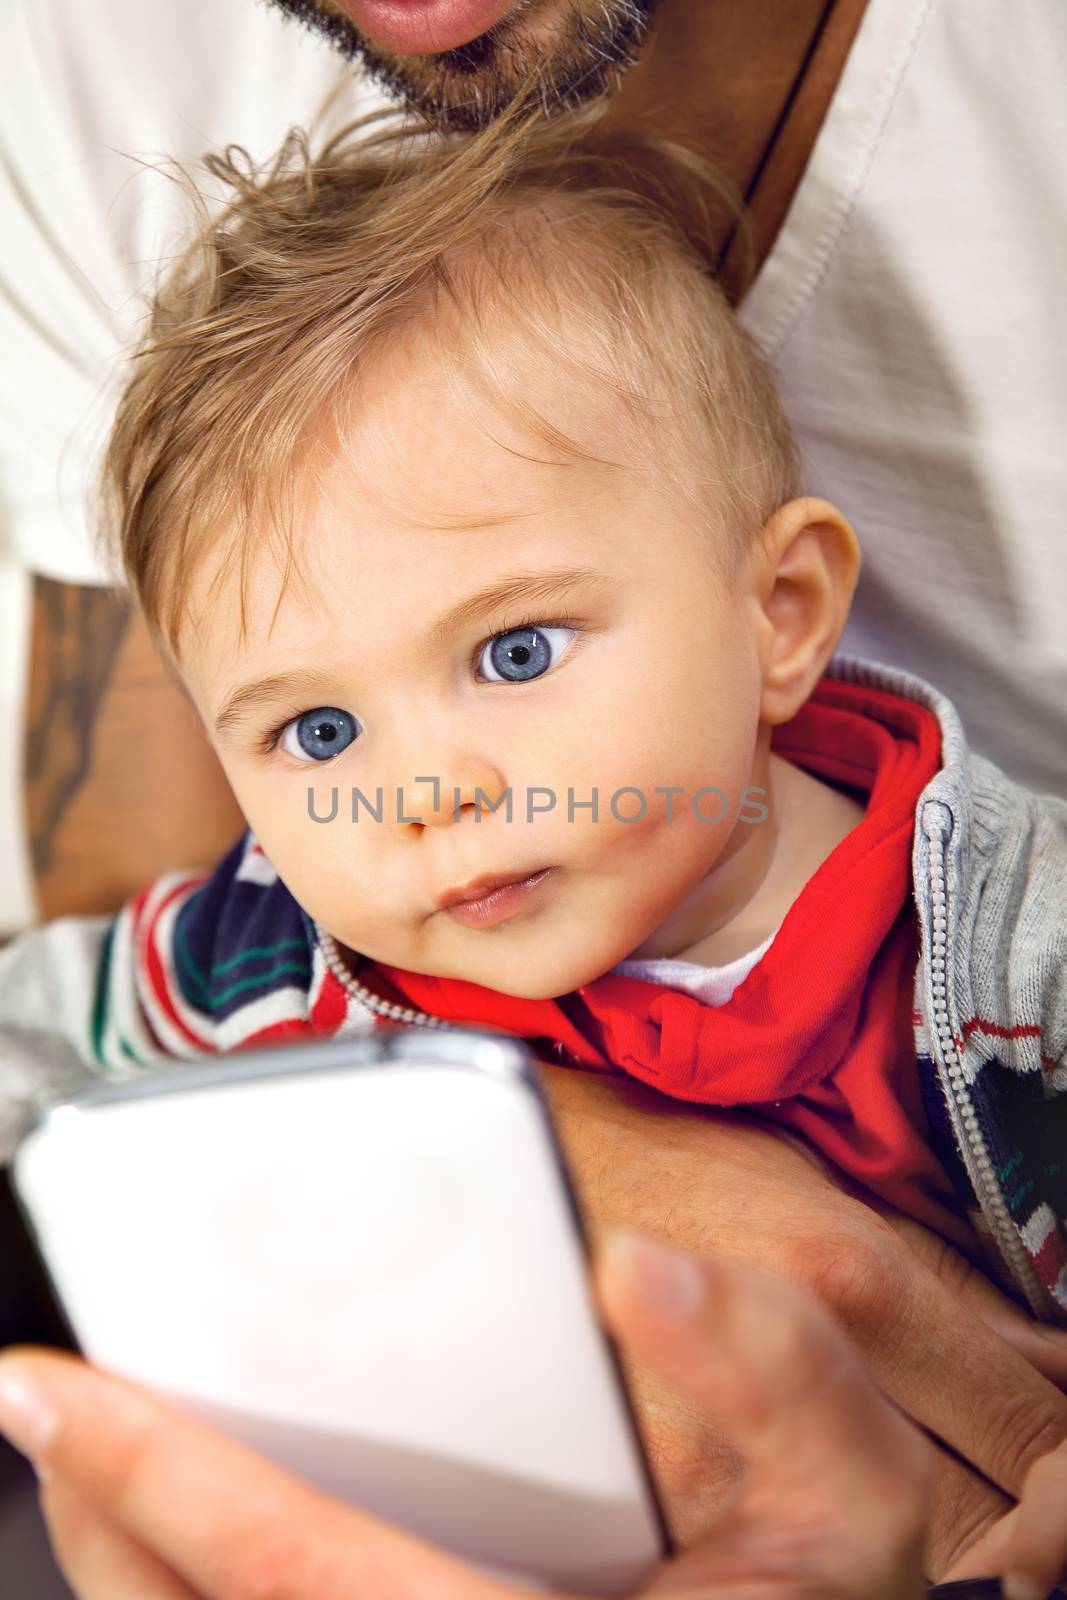 Young cute little boy is watching onto a sellphone with affection embraced by his father.